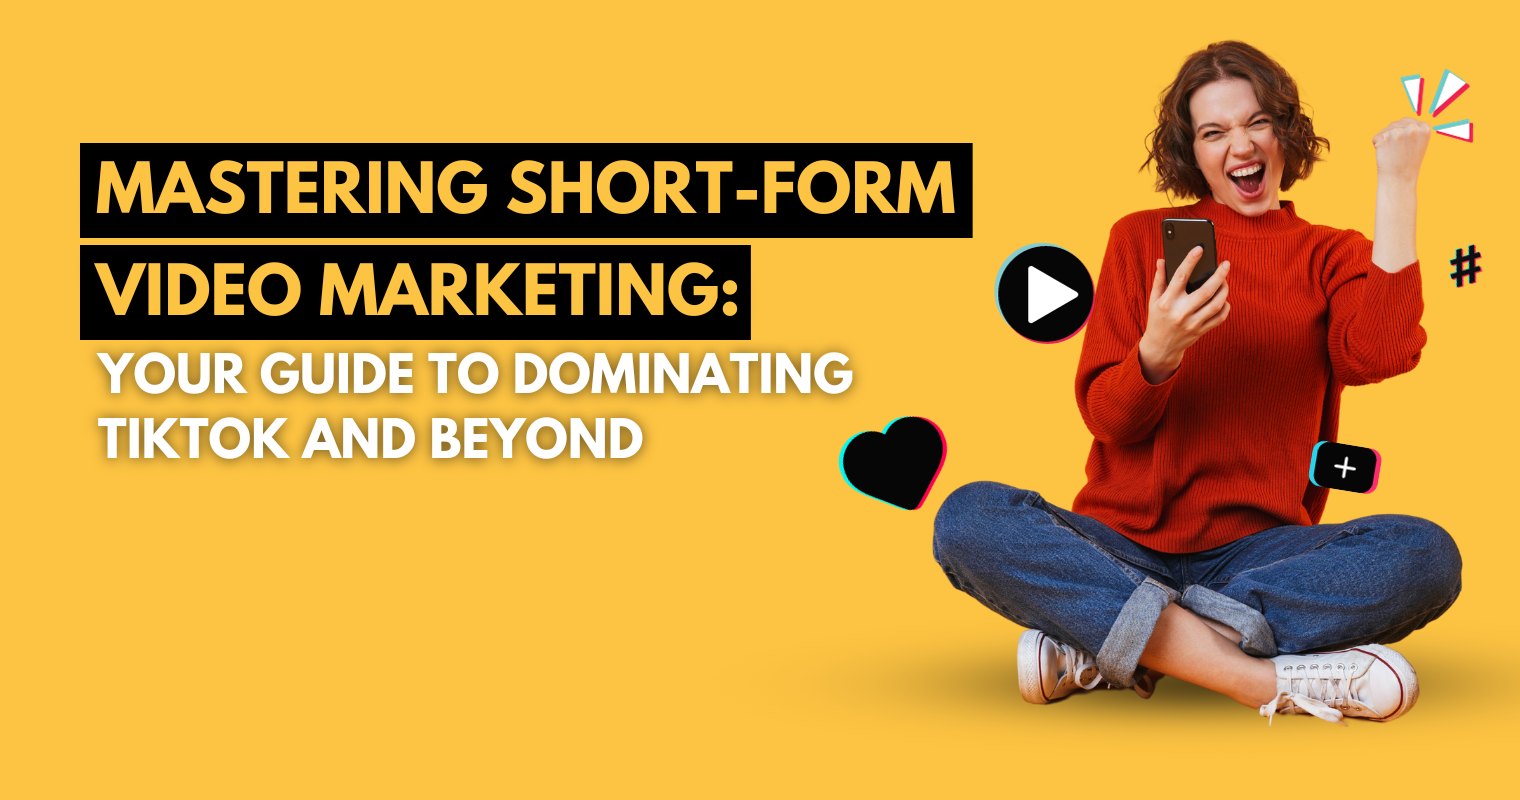 Mastering Short-Form Video Marketing: Your Guide to Dominating TikTok and Beyond